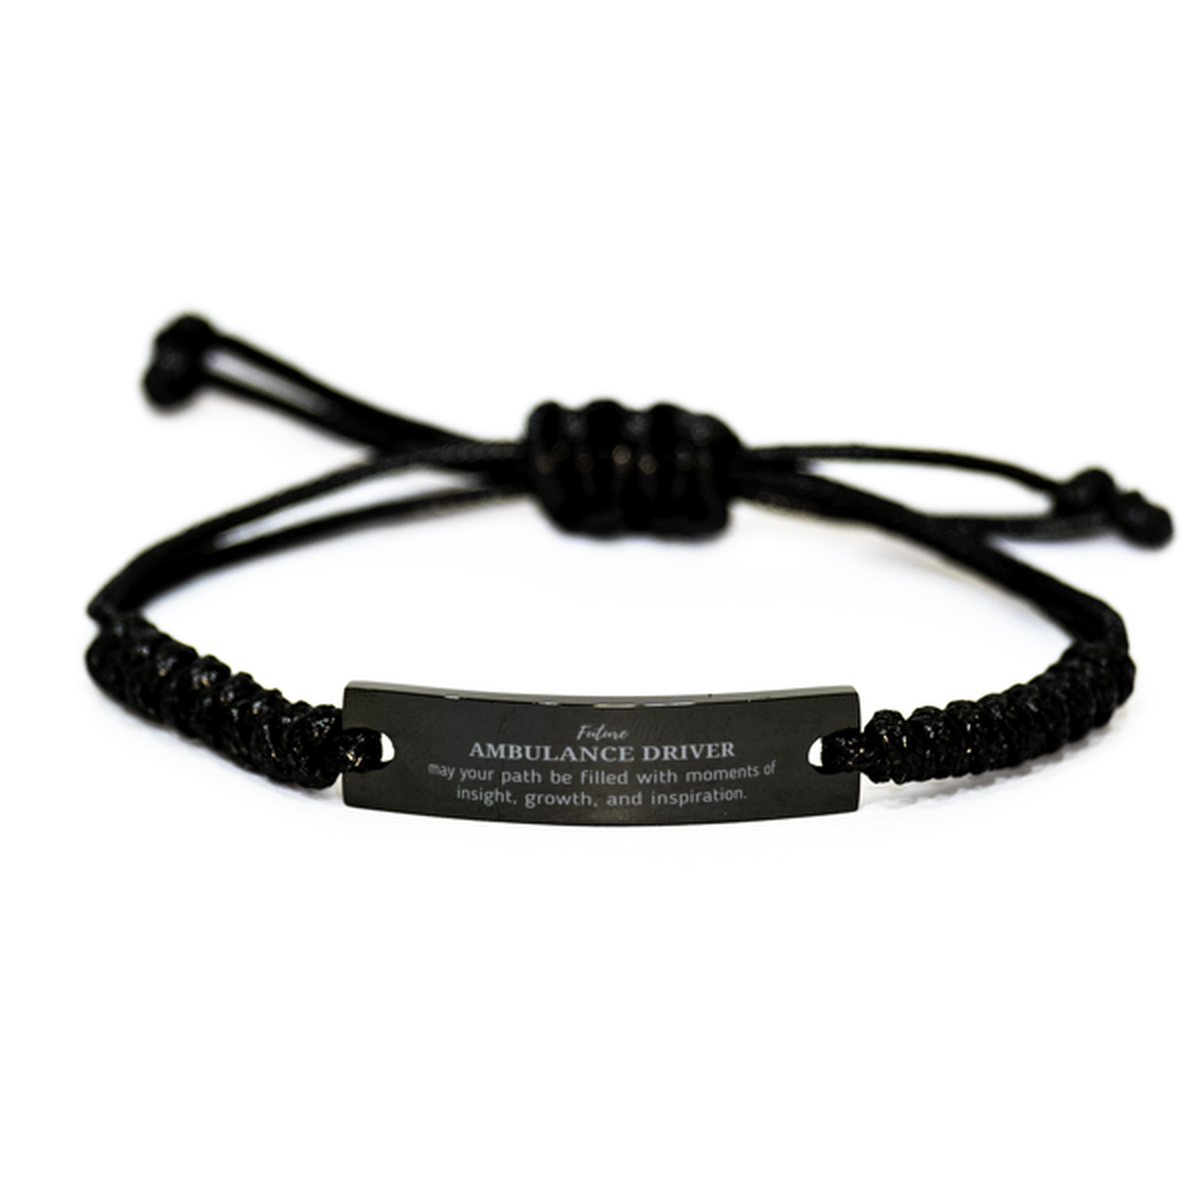 Future Ambulance Driver Gifts, May your path be filled with moments of insight, Graduation Gifts for New Ambulance Driver, Christmas Unique Black Rope Bracelet For Men, Women, Friends